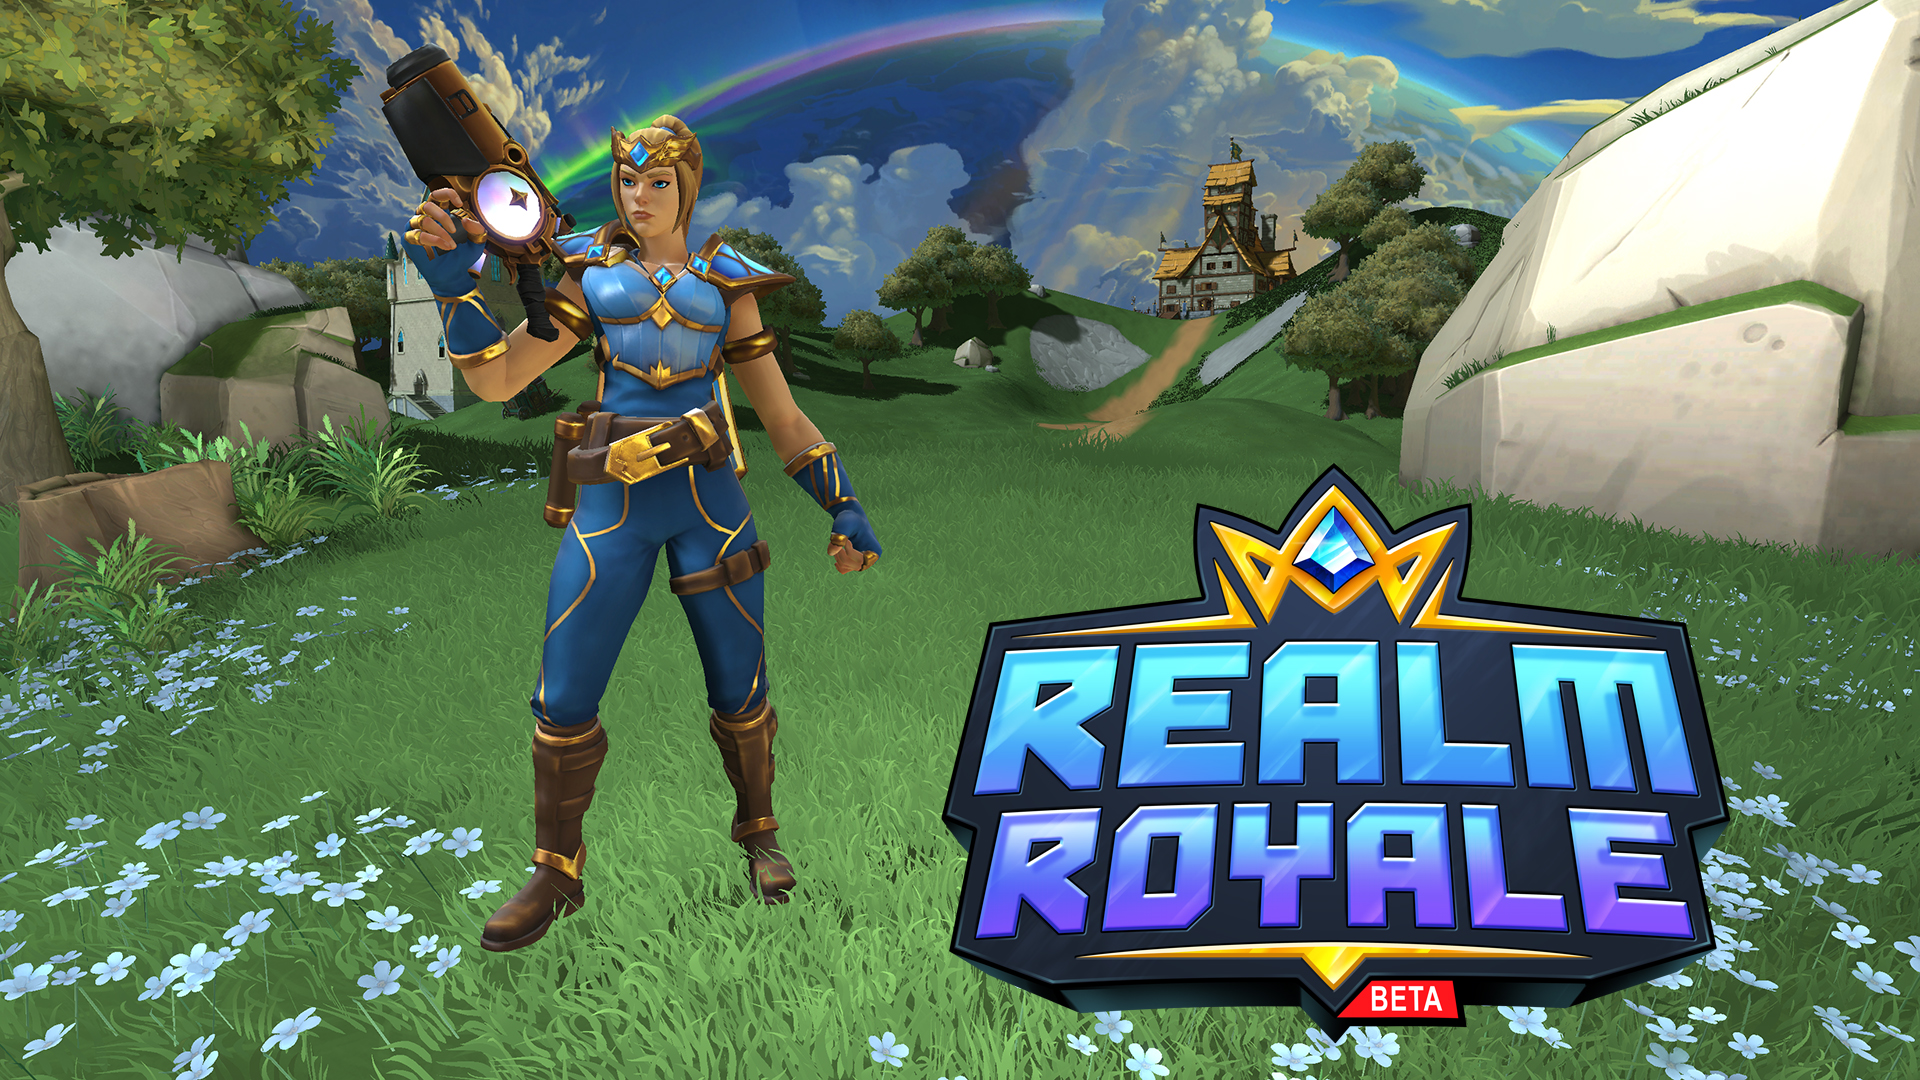 Realm Royale Join Us This Weekend For Our Next Limited Time Event A Little Back And Forth With Only A Plasma Launcher Do You Think You Can Win The Crown